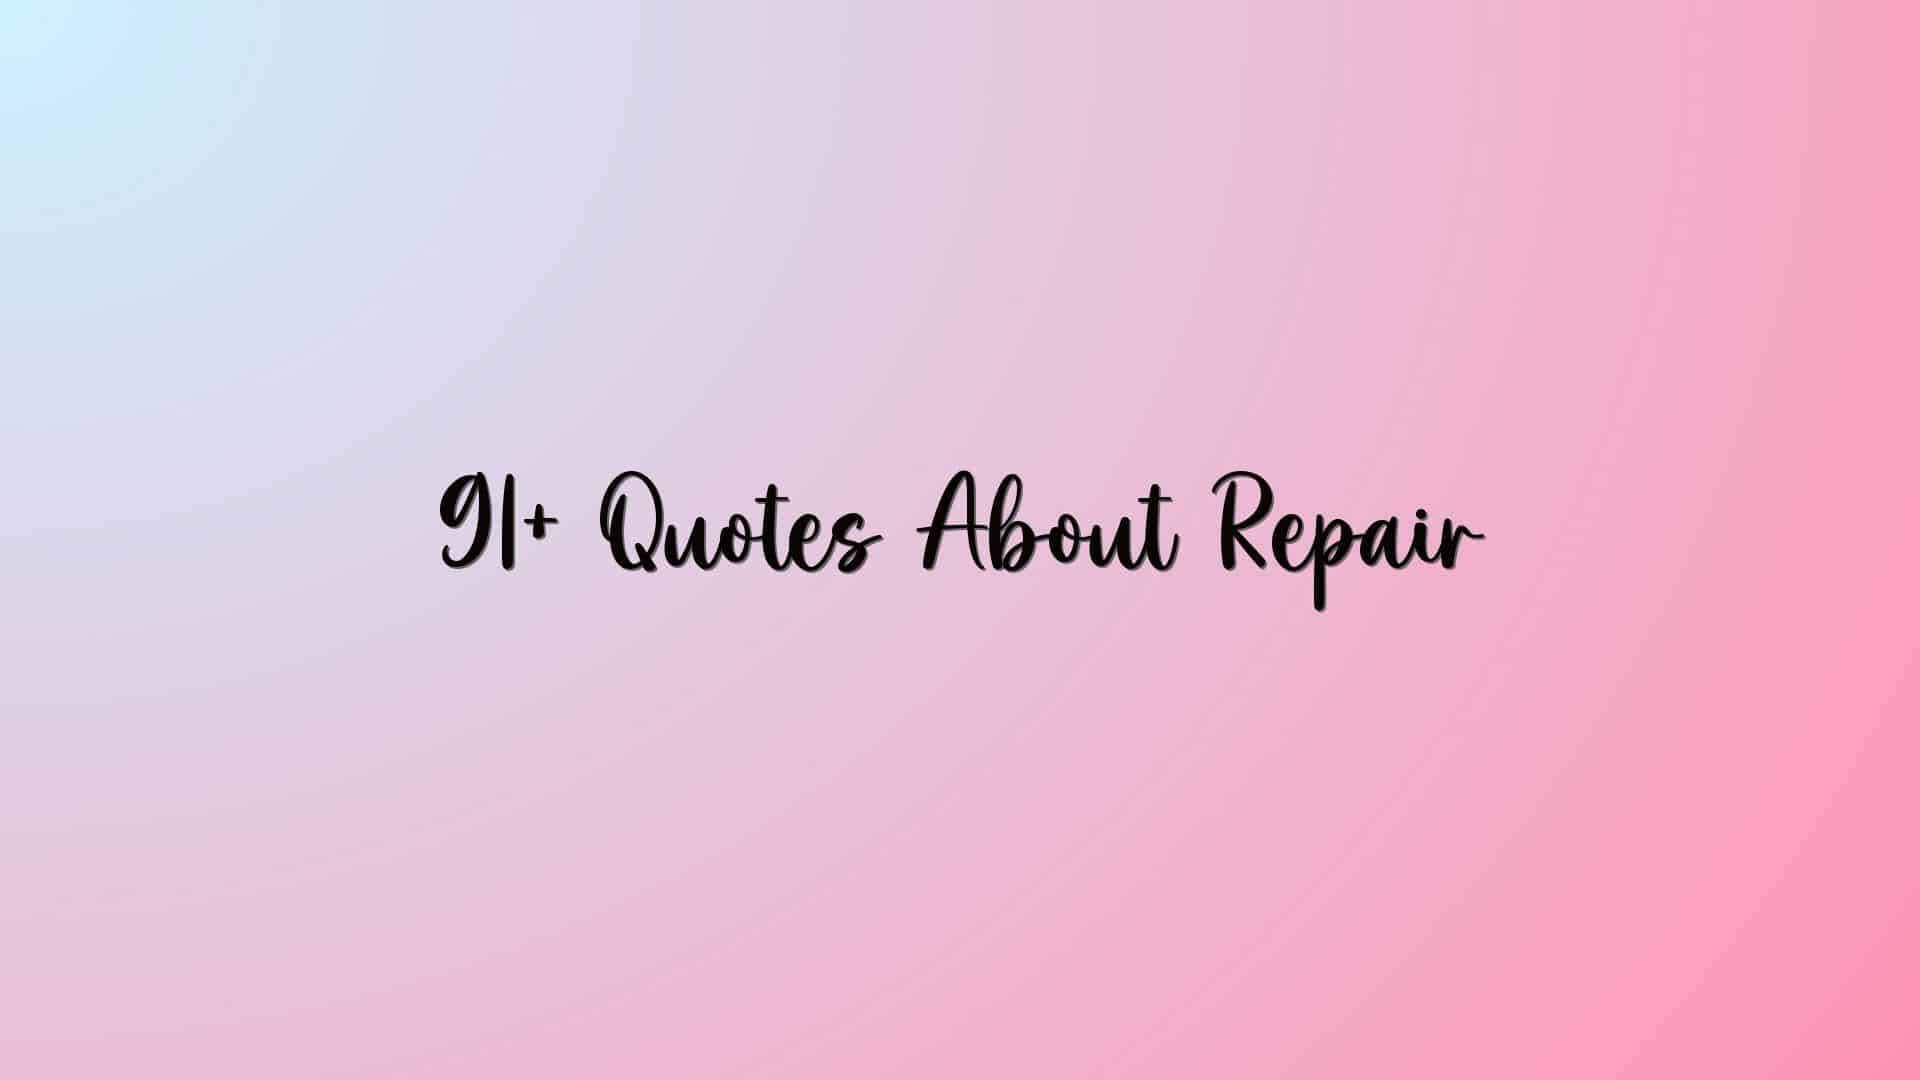 91+ Quotes About Repair